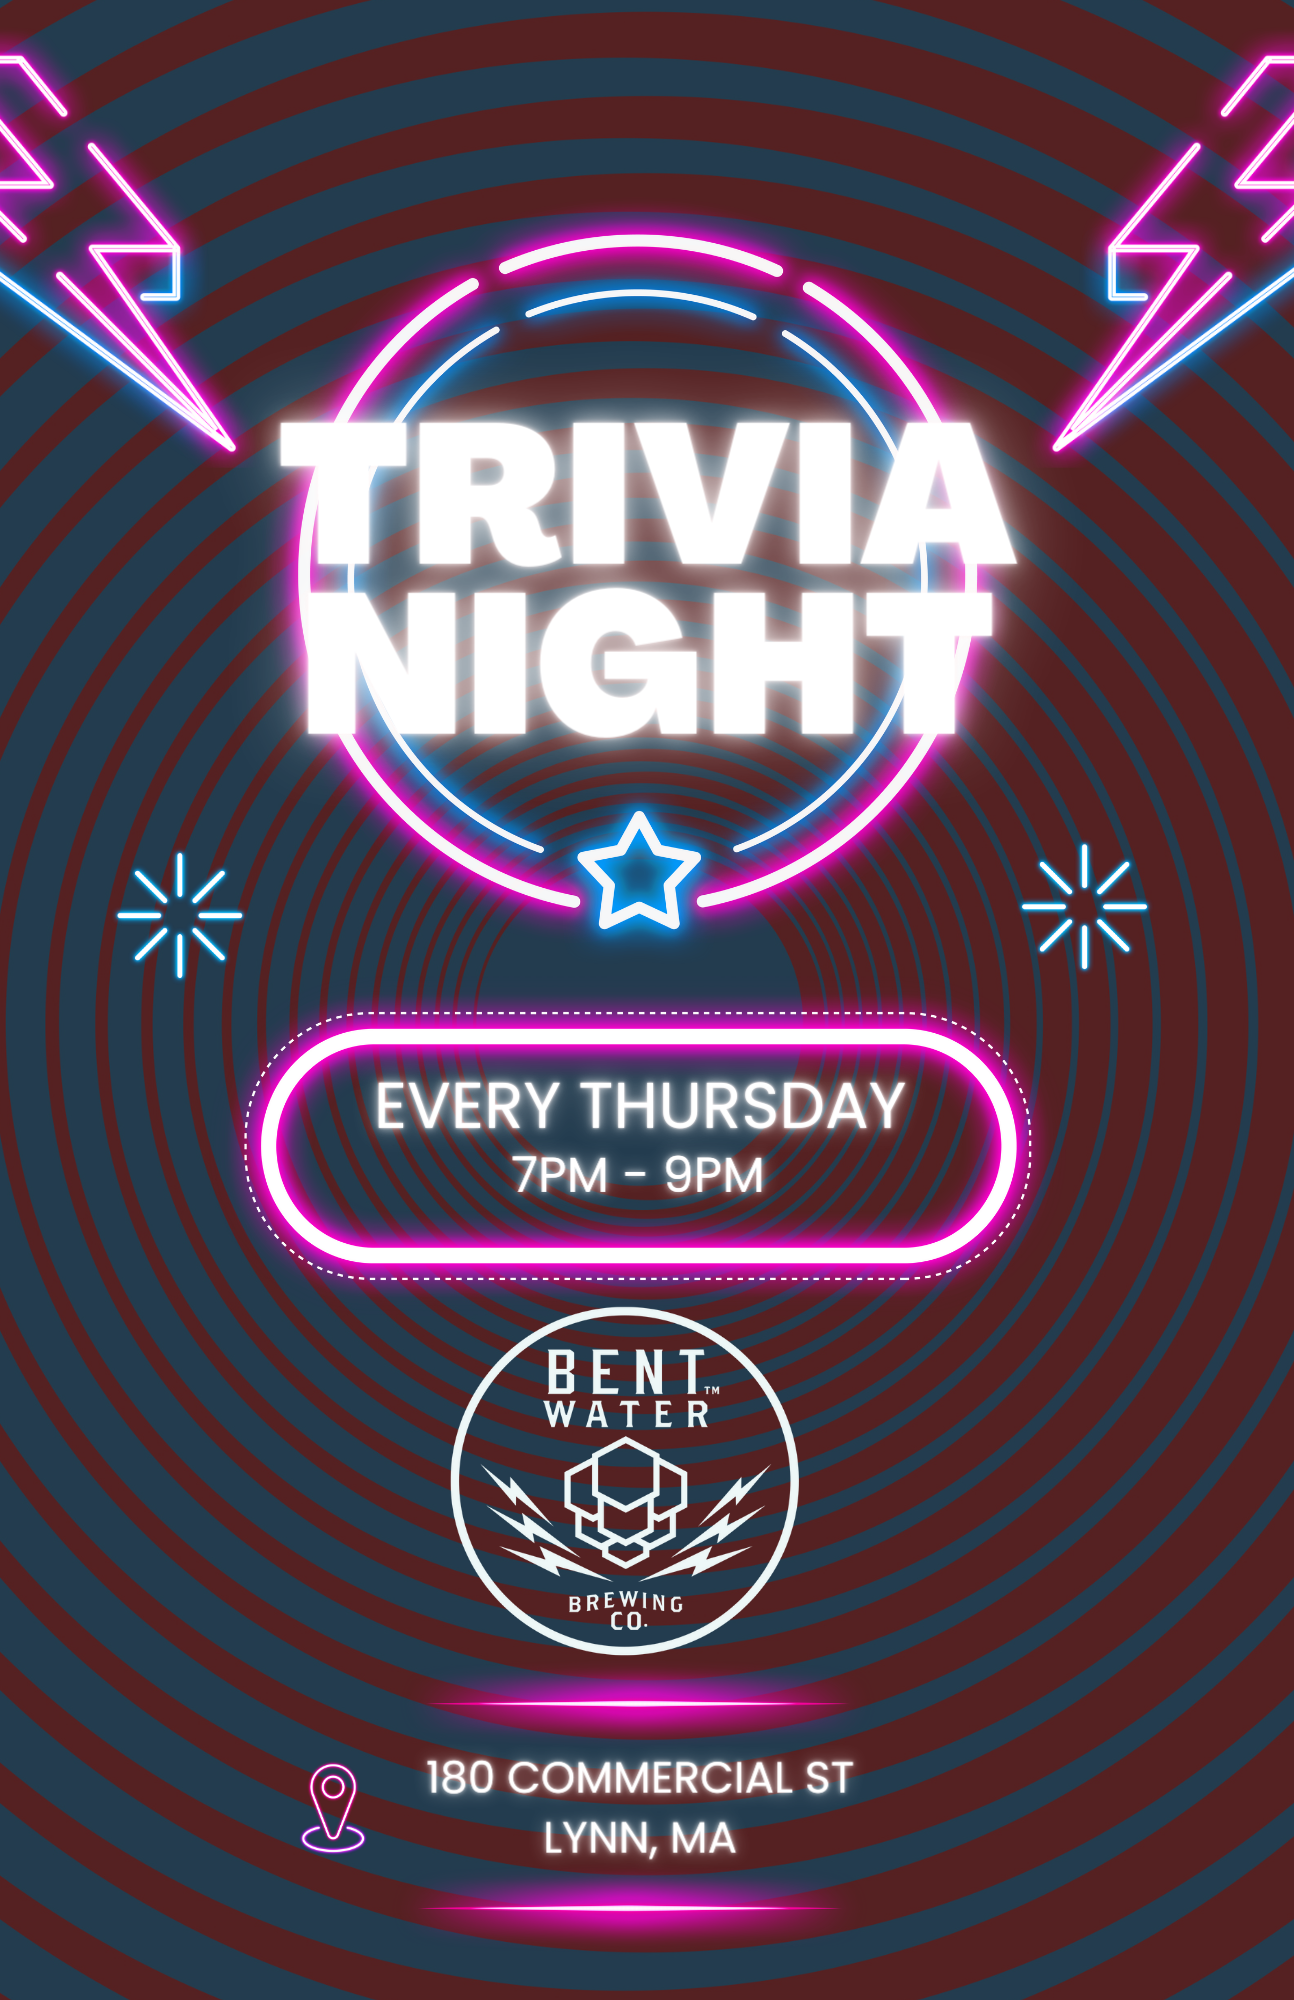 A flyer for trivia night with neon lights and lightning bolts.